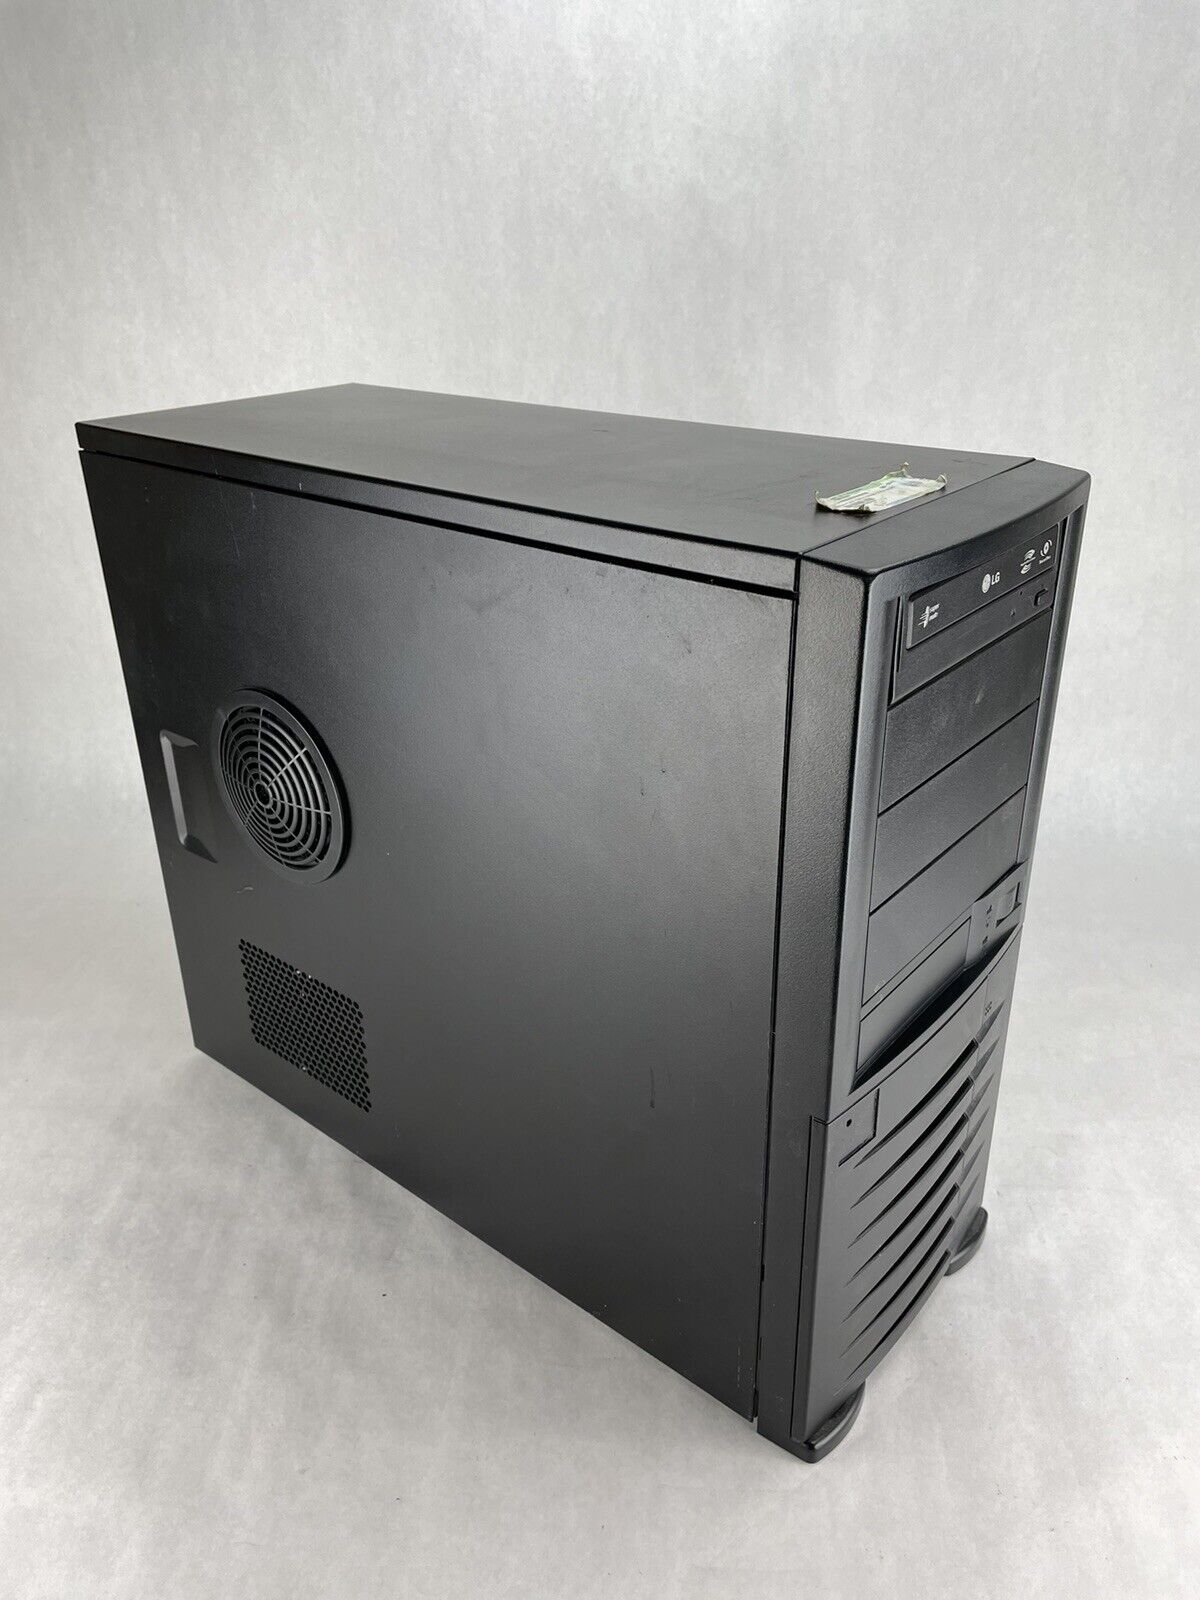 NEC S|1520 Server Chassis Full ATX Computer Case